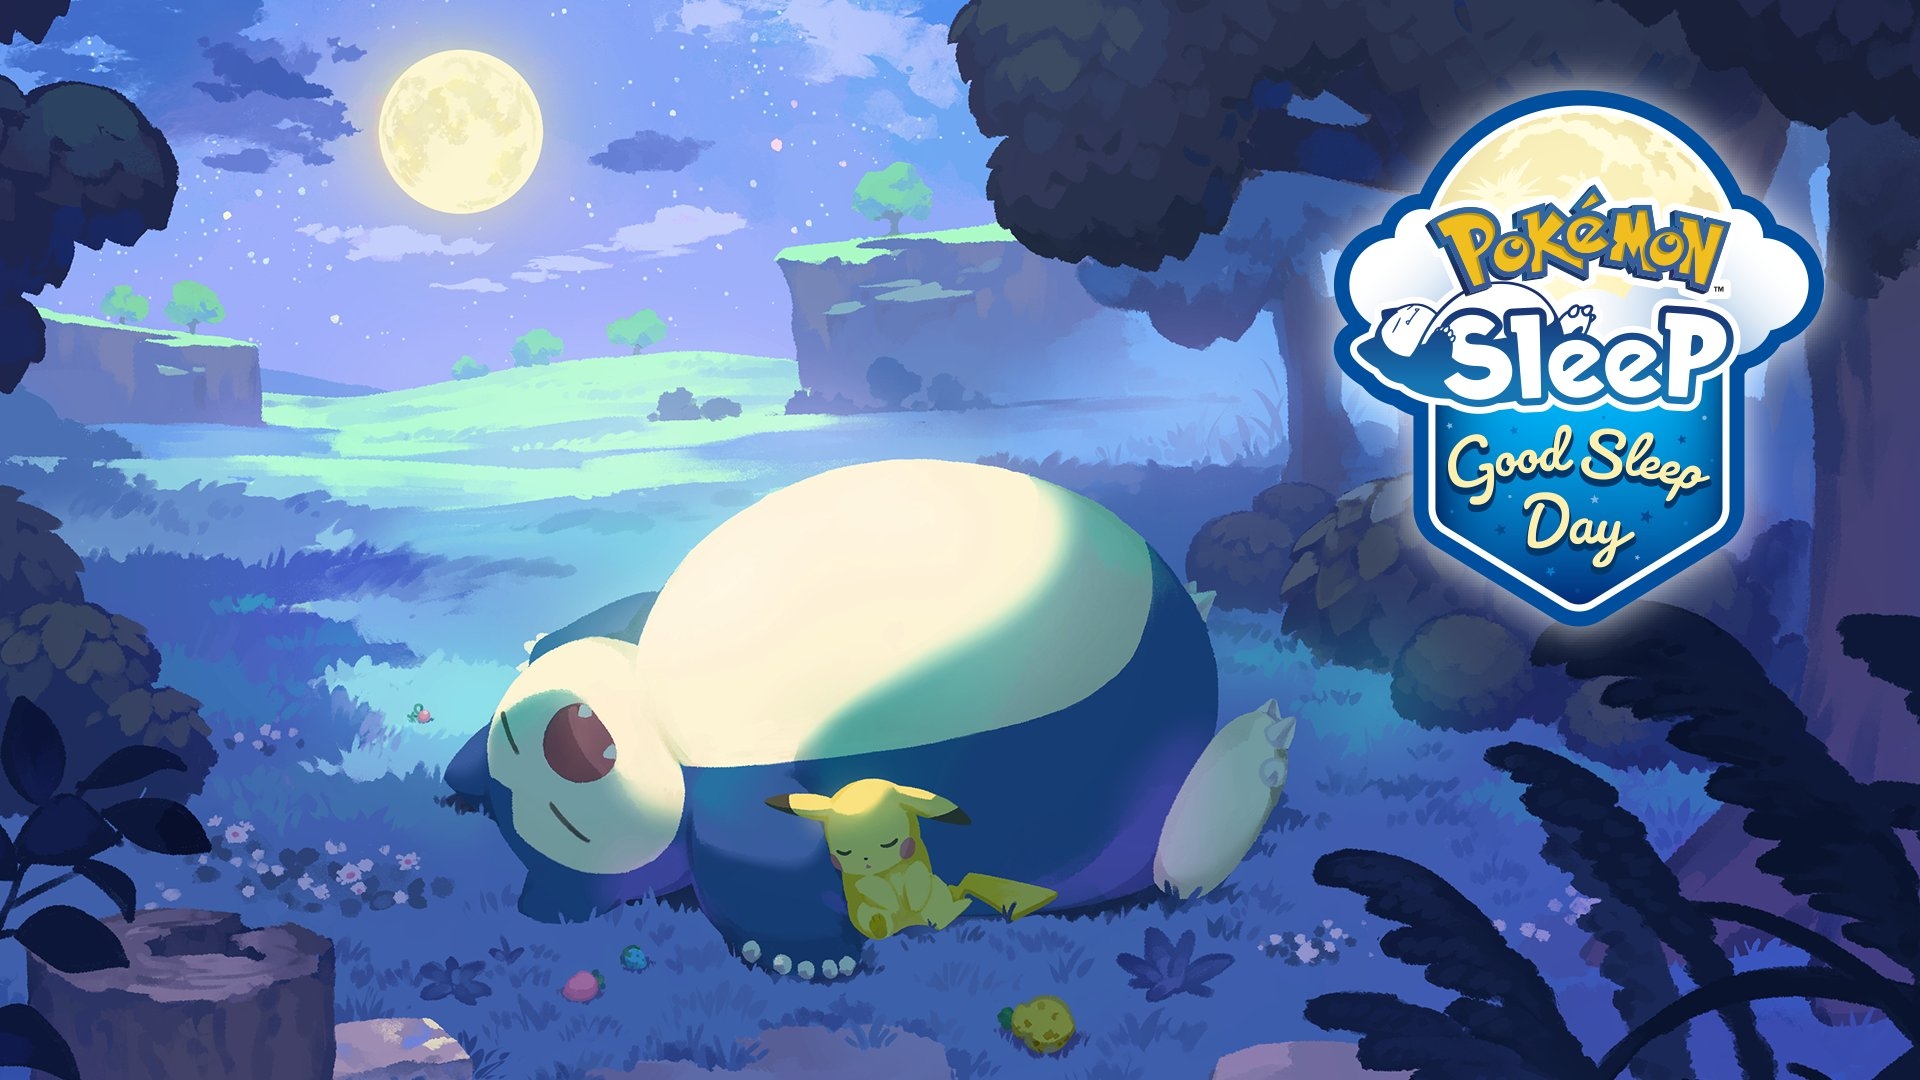 Snorlax and Pikachu sleeping under the full moon